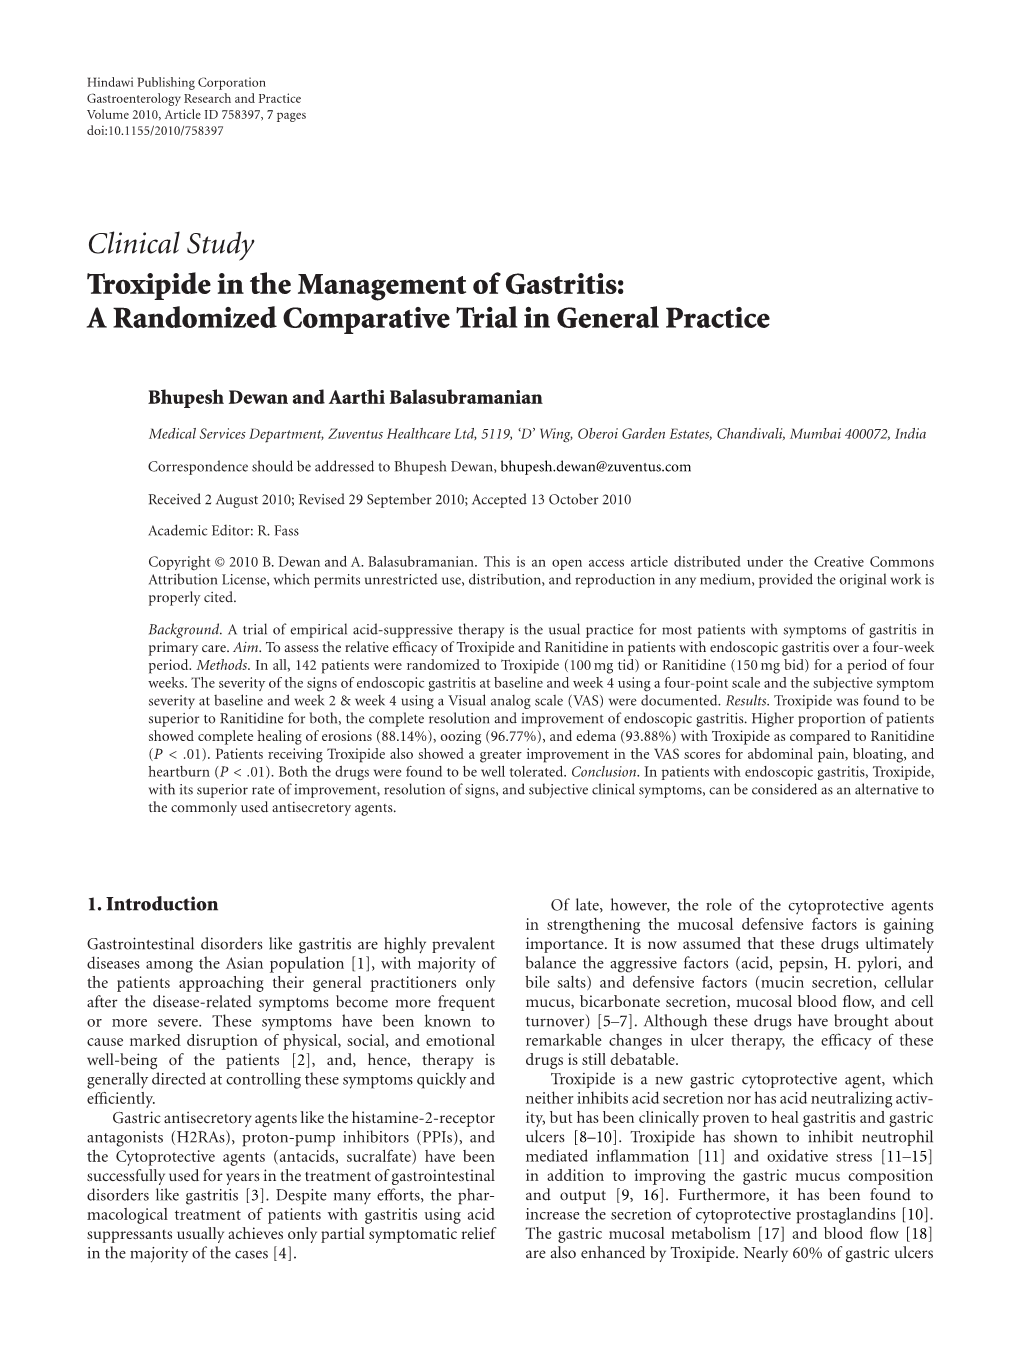 Clinical Study Troxipide in the Management of Gastritis: a Randomized Comparative Trial in General Practice